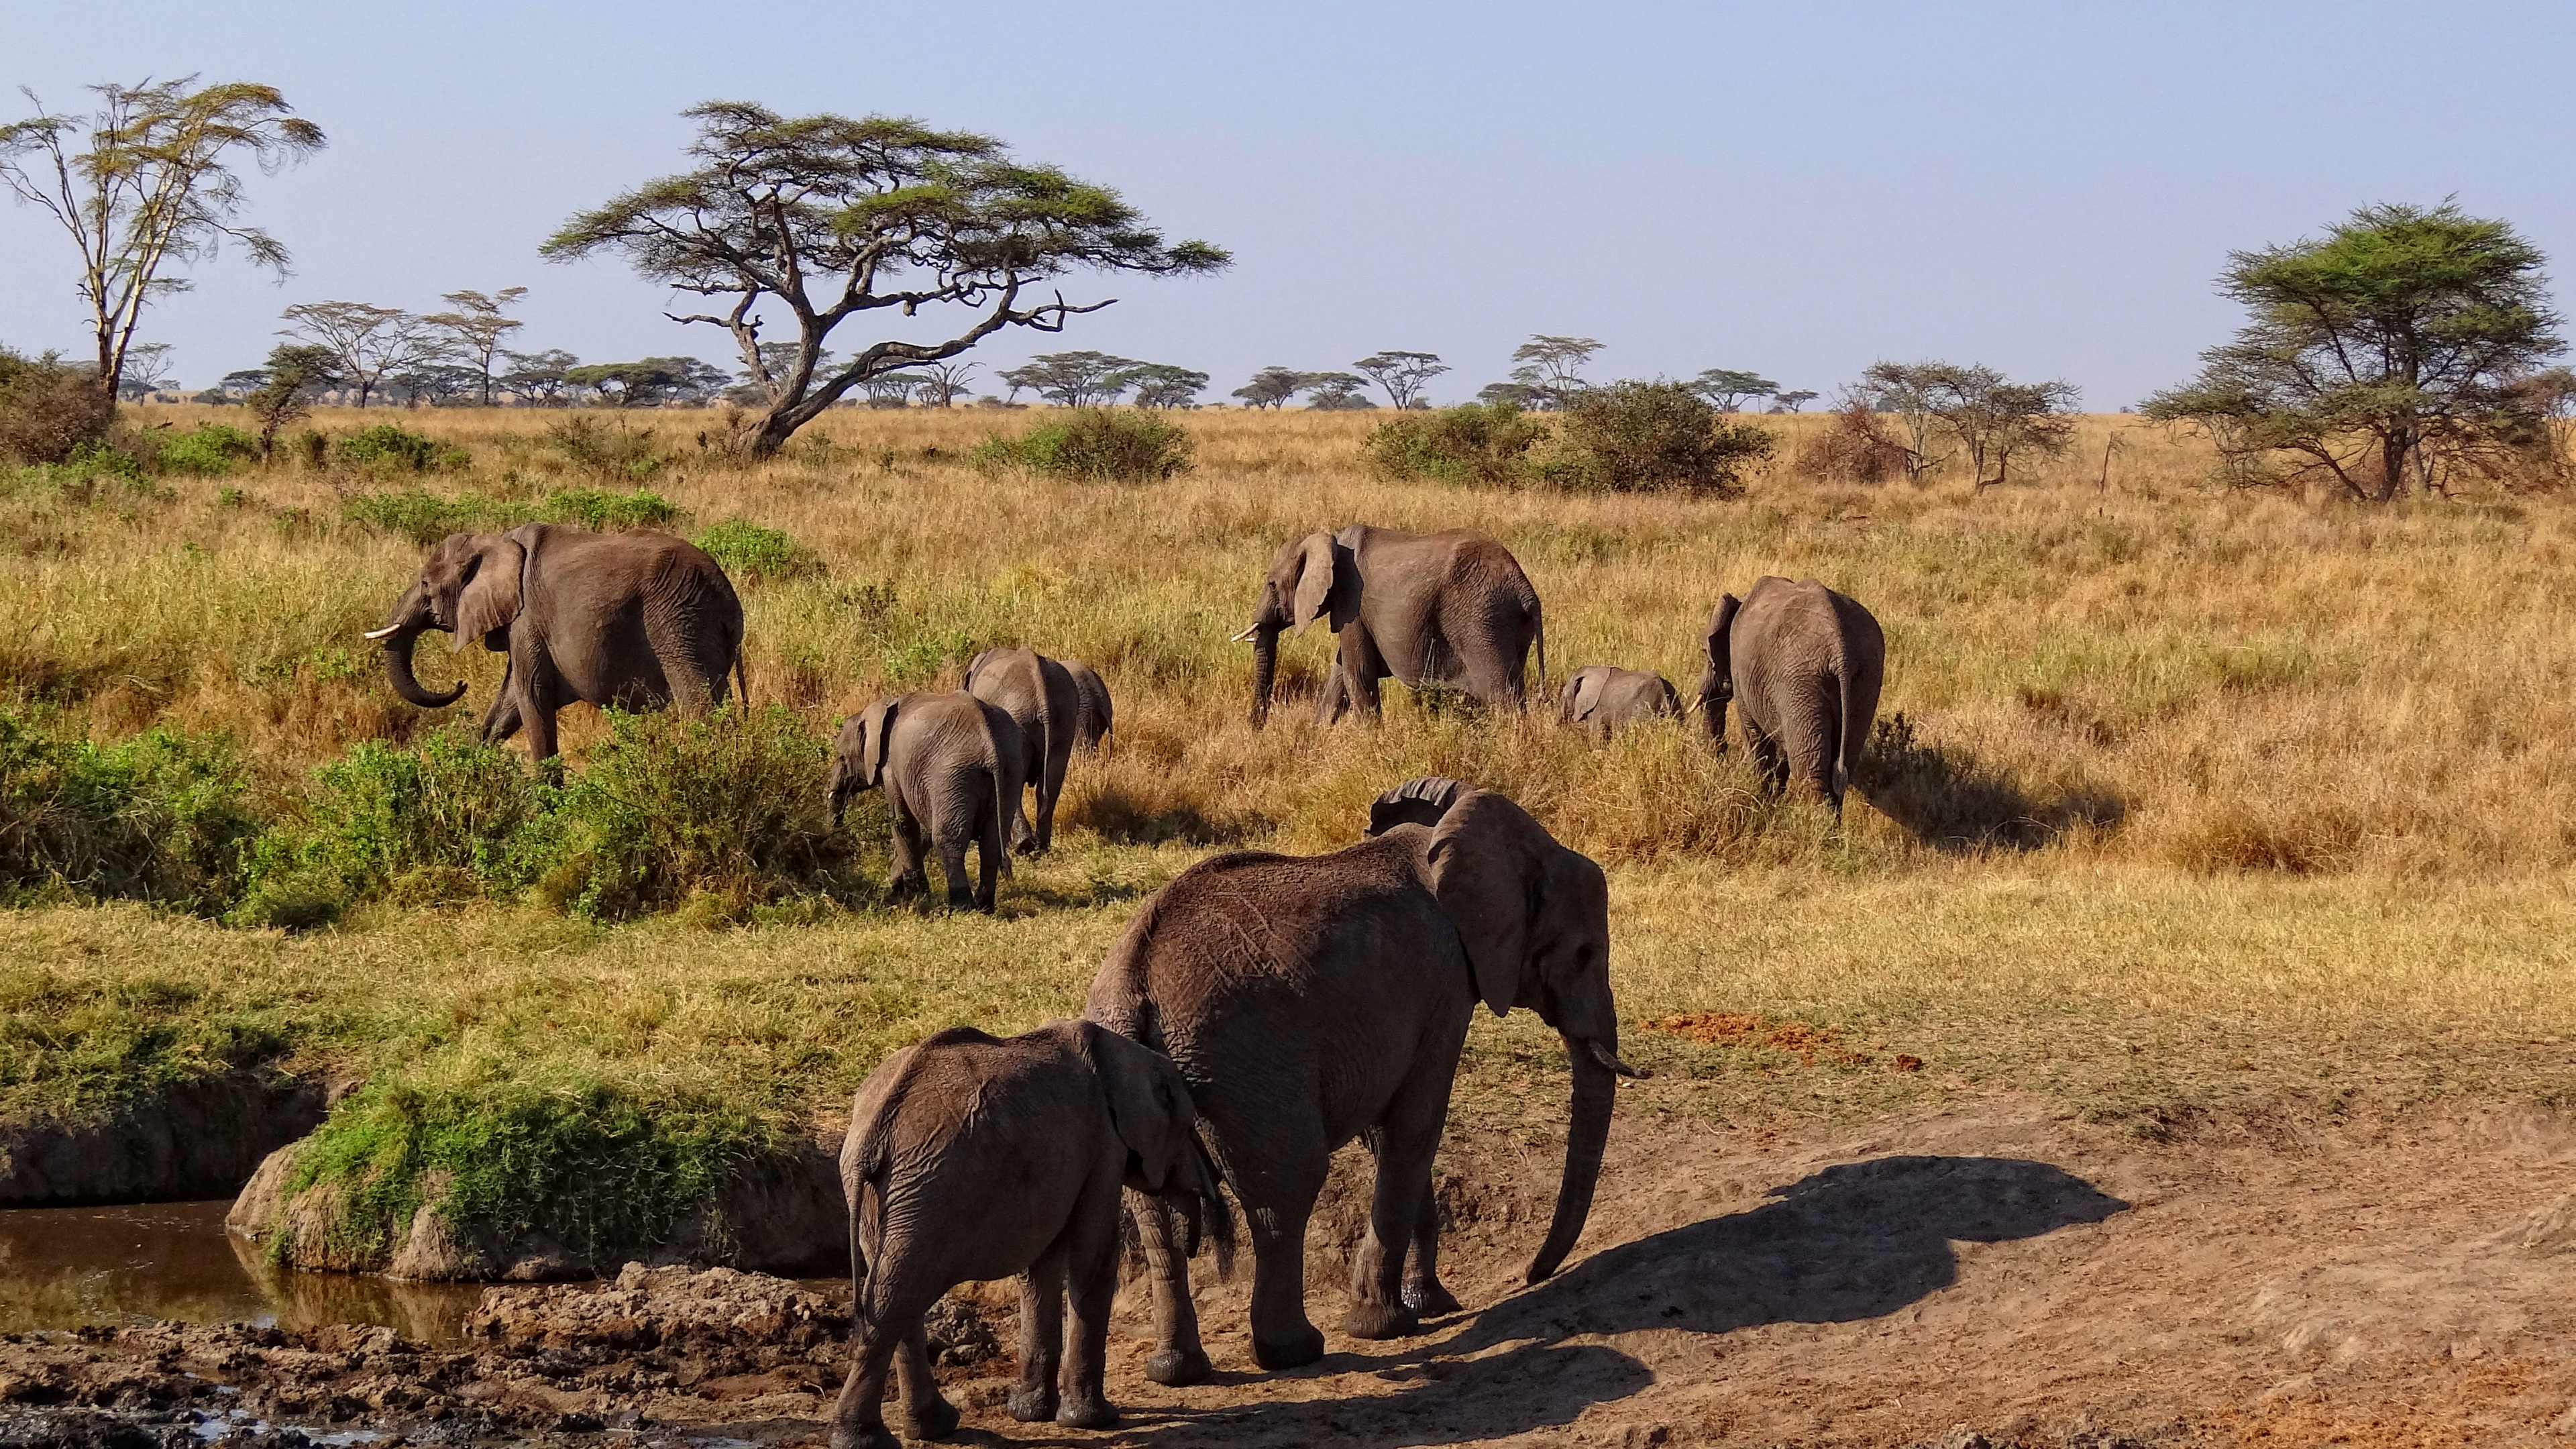 Group of Elephant Walking on Brown Field During Daytime. Wallpaper in 3840x2160 Resolution